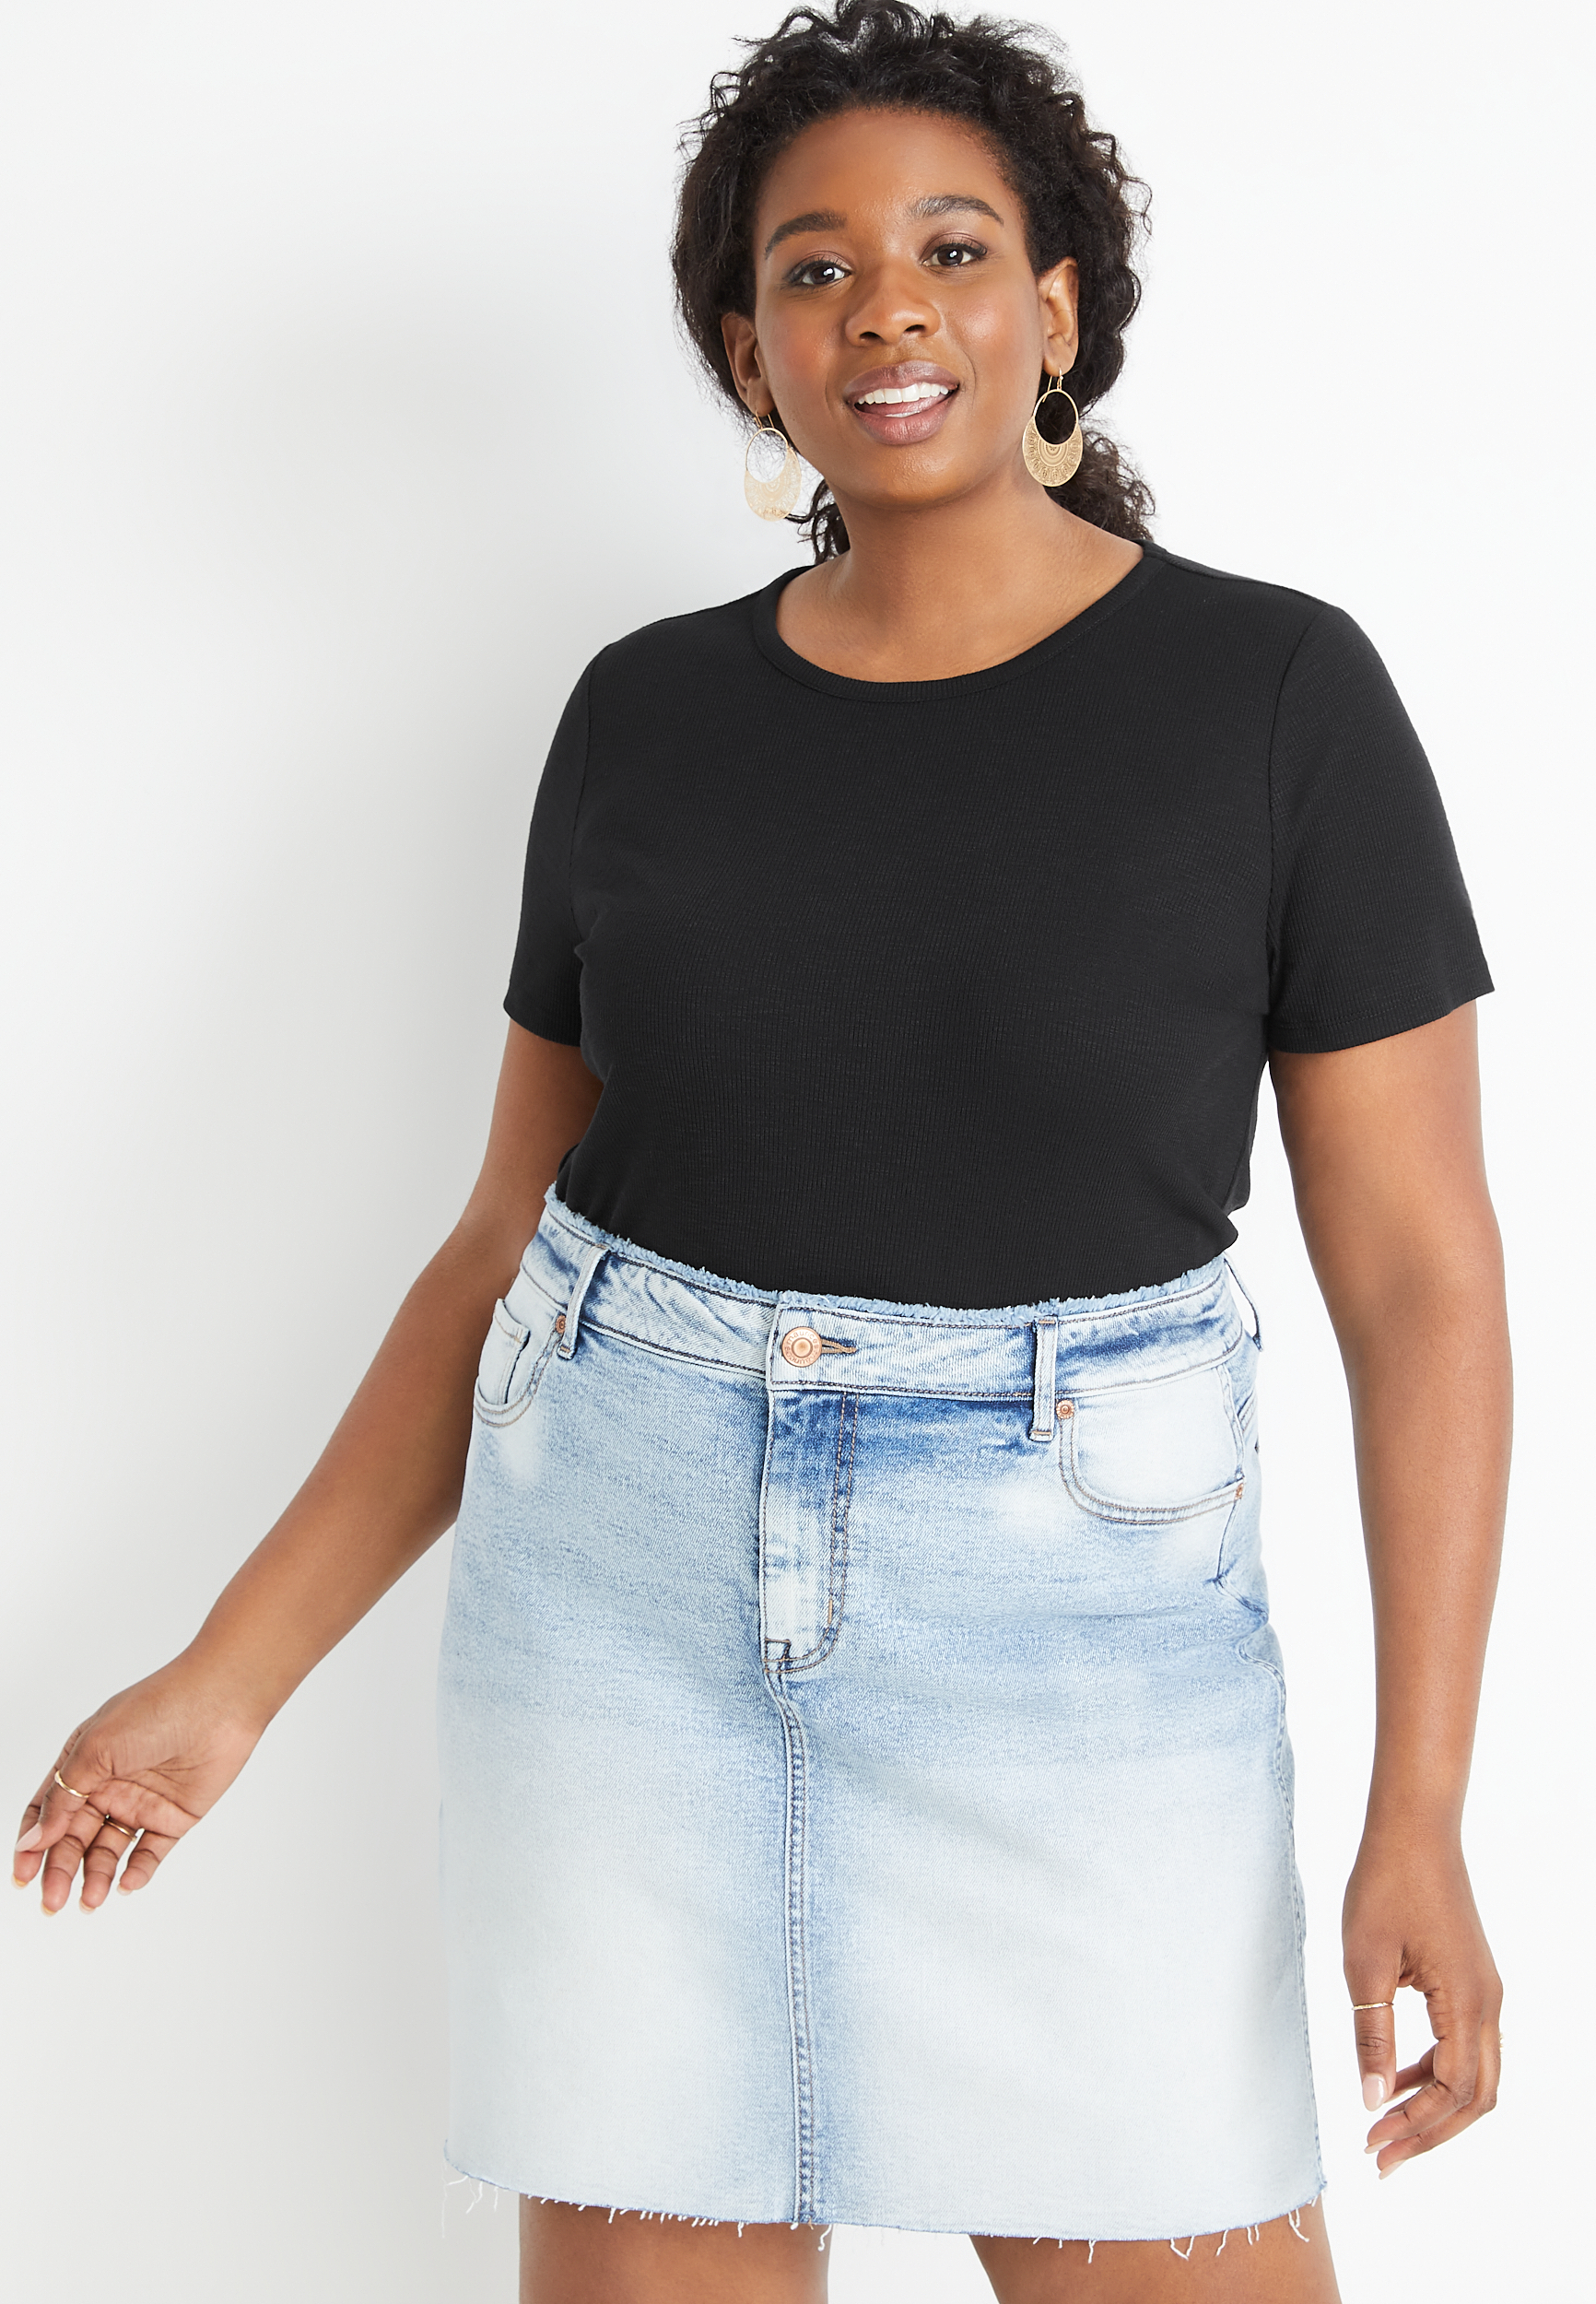 Plus Size Clothing | Plus Clearance maurices